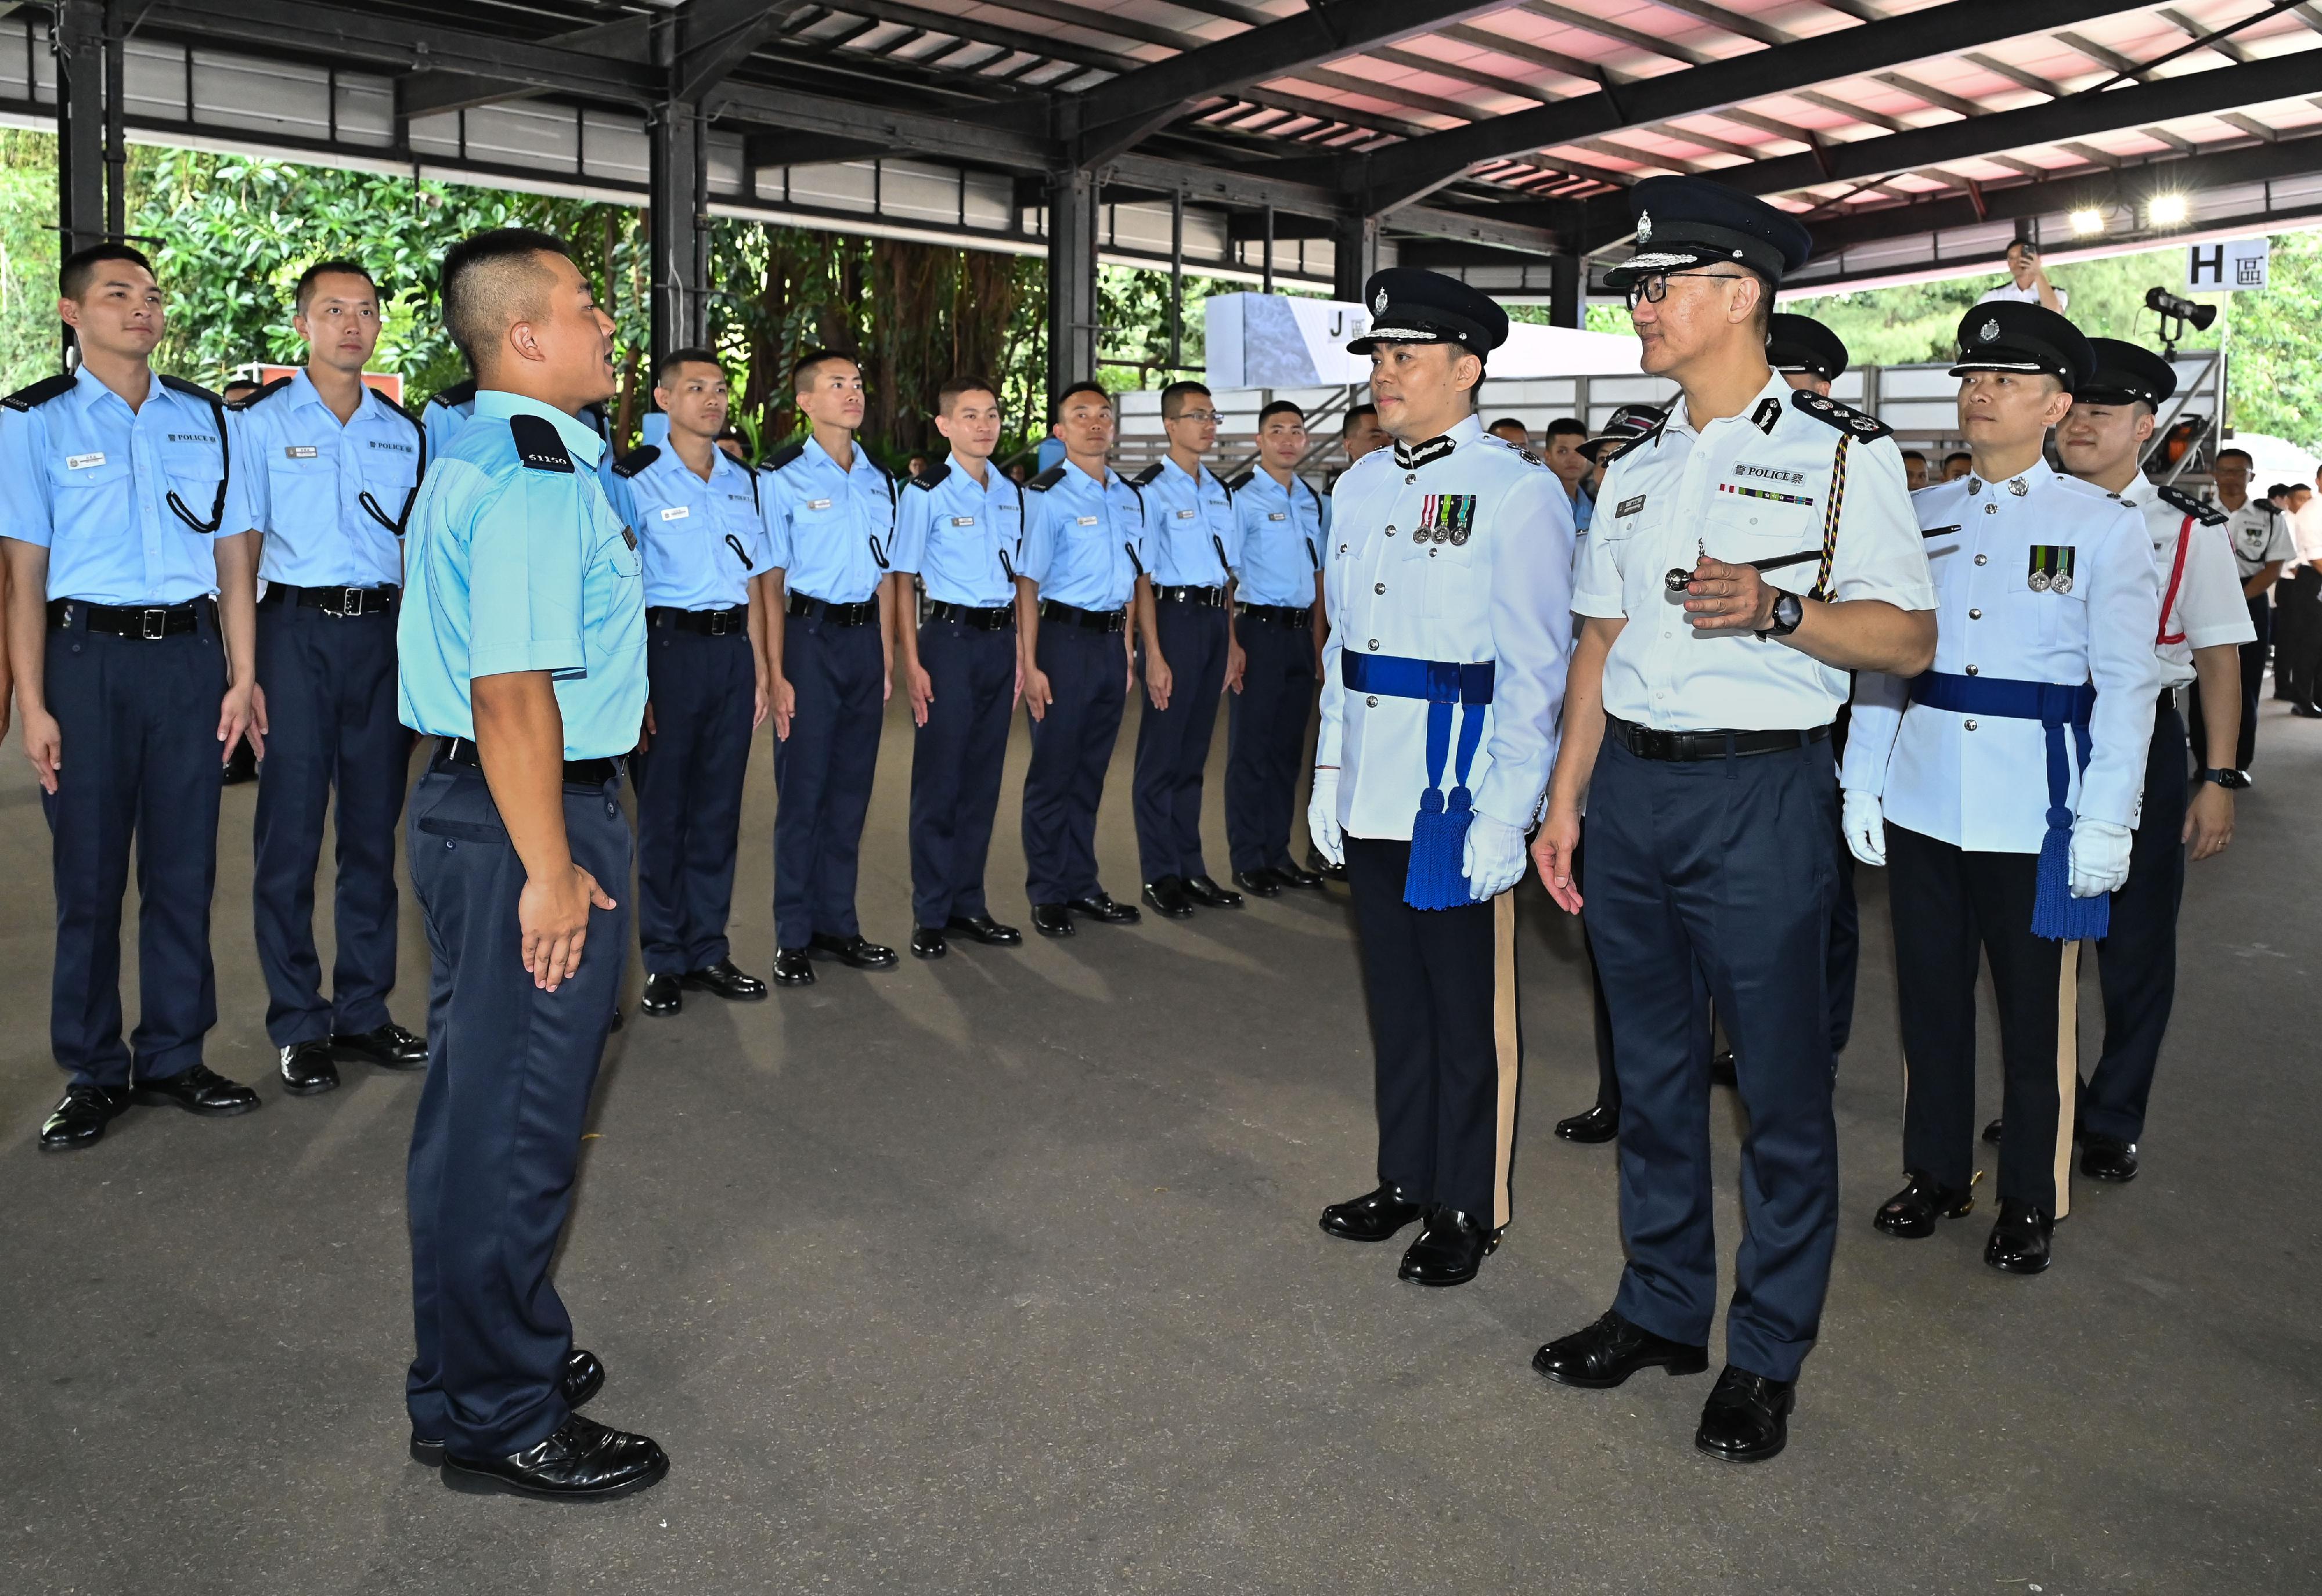 The Commissioner of Police, Mr Siu Chak-yee (third right) and the Deputy Commissioner of Police (Operations), Mr Yuen Yuk-kin (fourth right), meet graduates after the passing-out parade held at the Hong Kong Police College today (June 24).